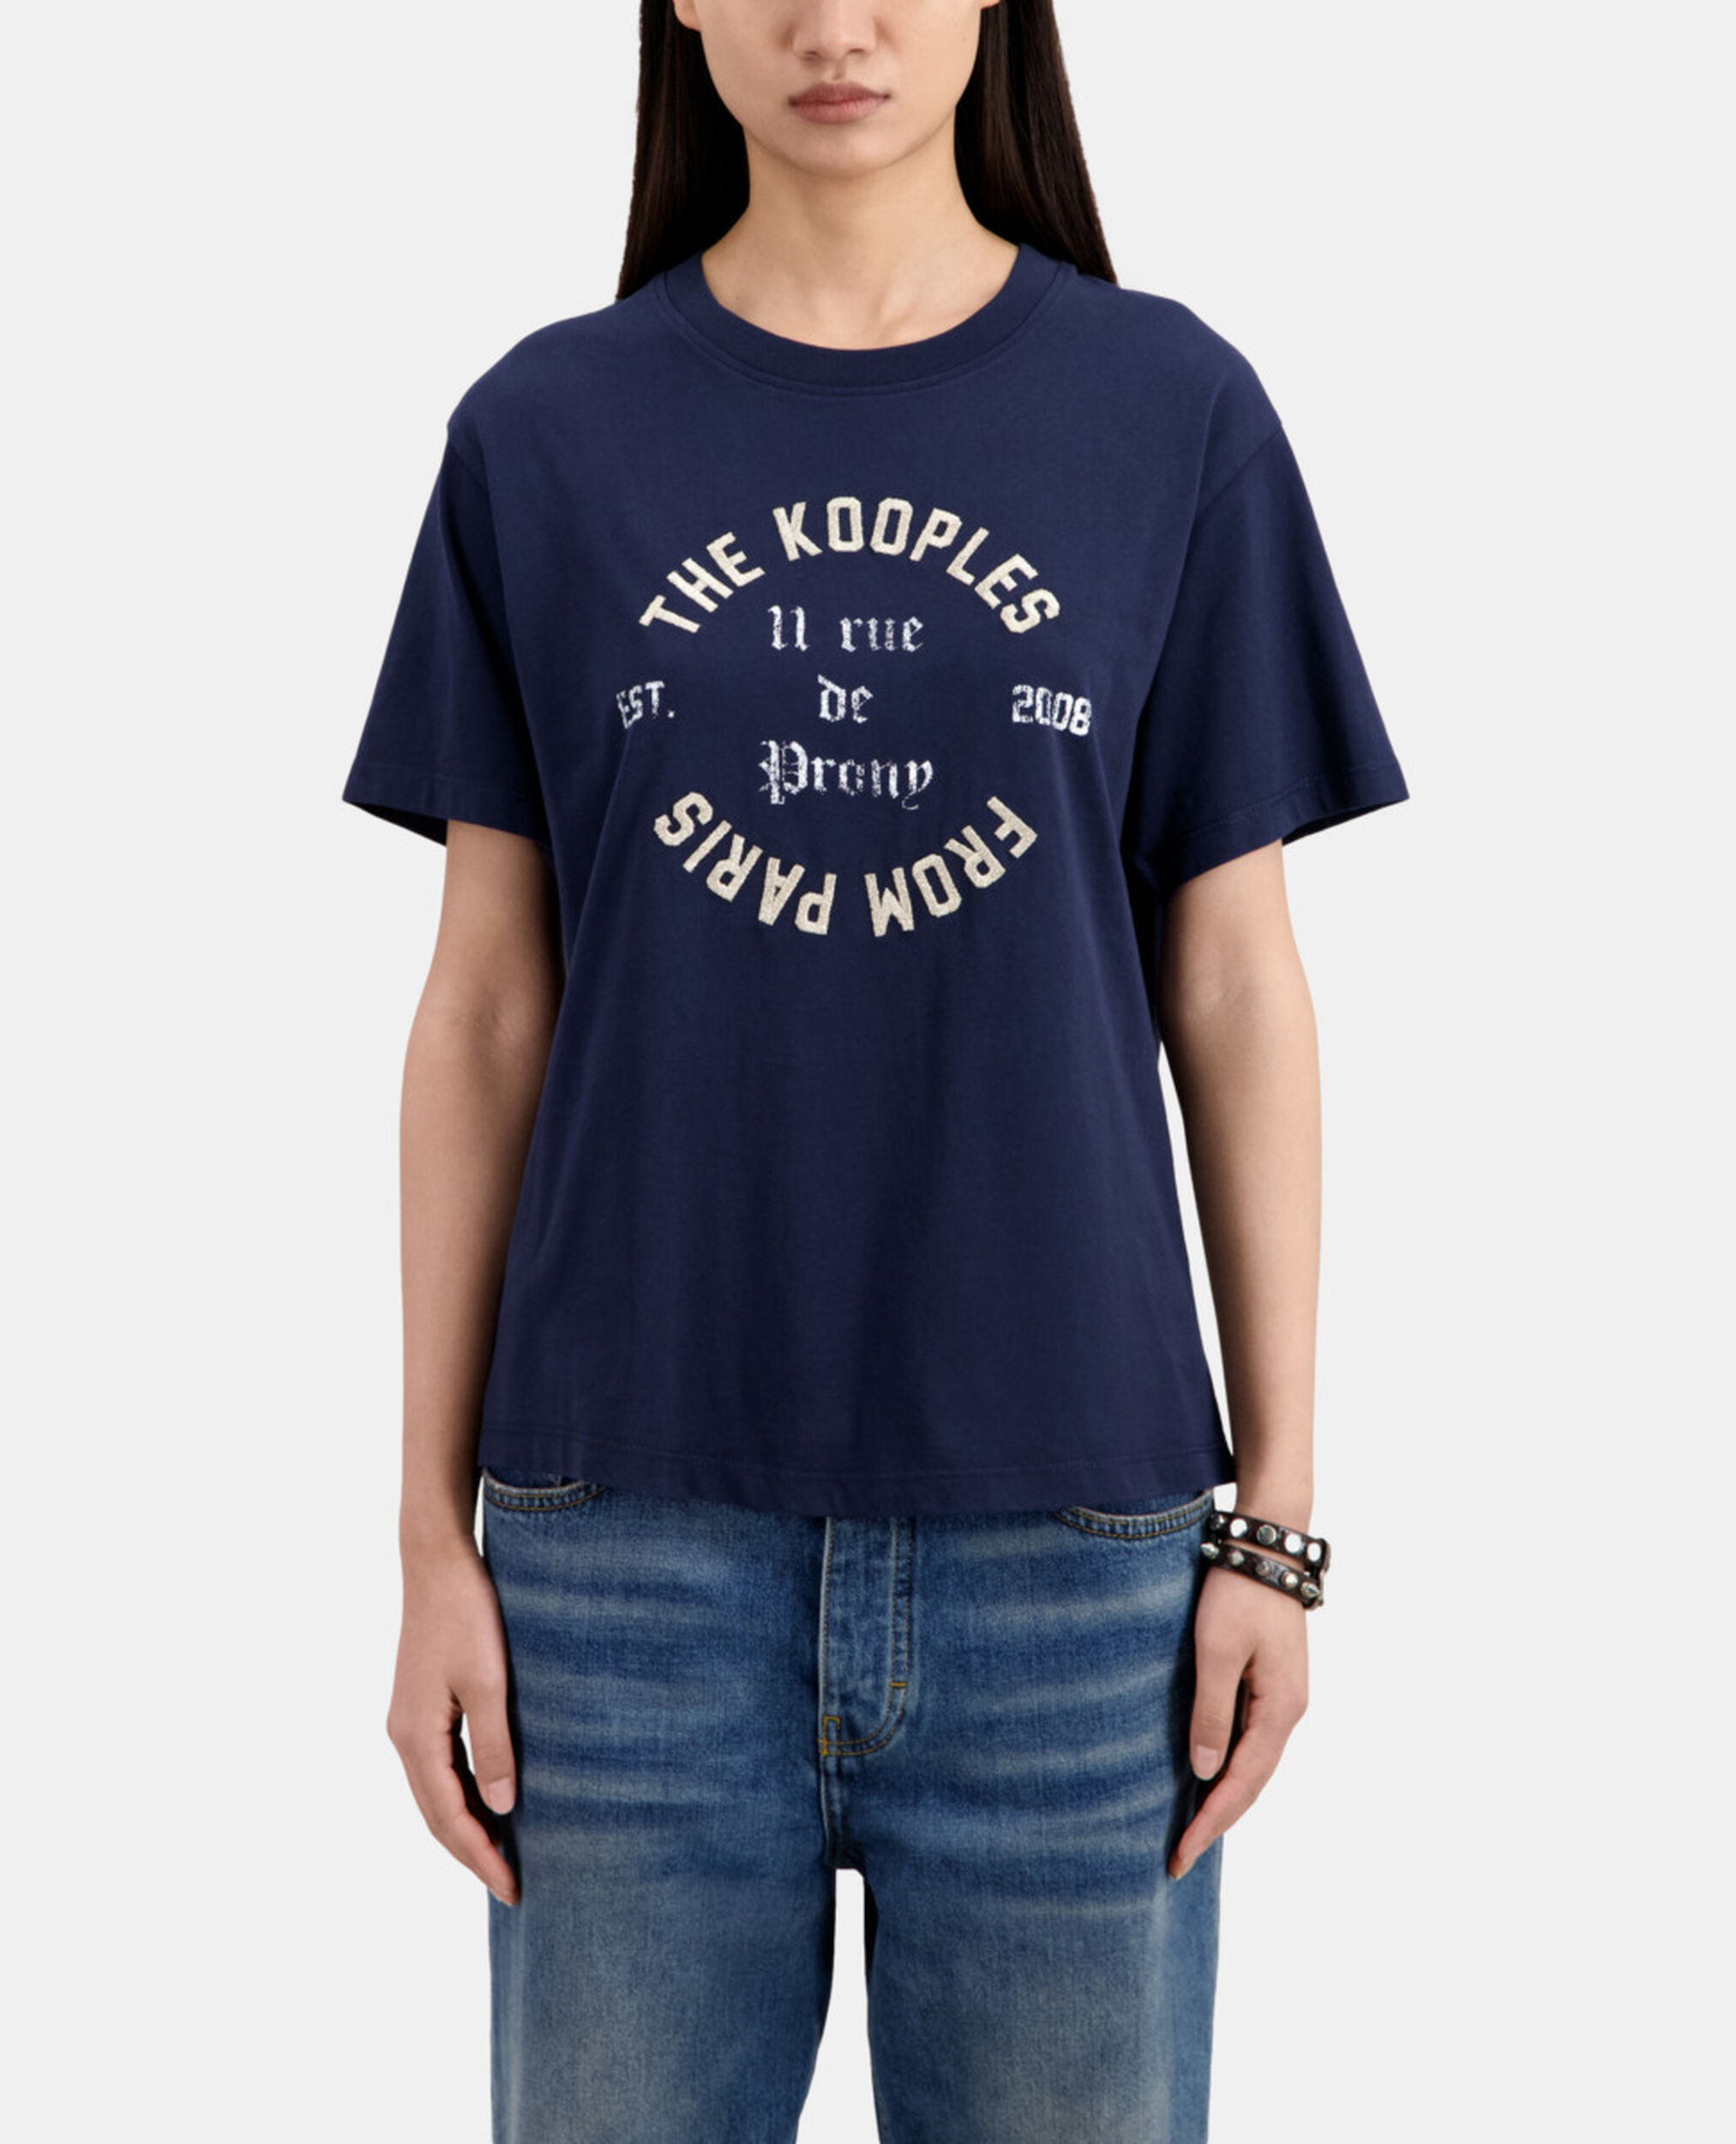 Women's navy blue t-shirt with 11 rue de prony serigraphy, NAVY, hi-res image number null